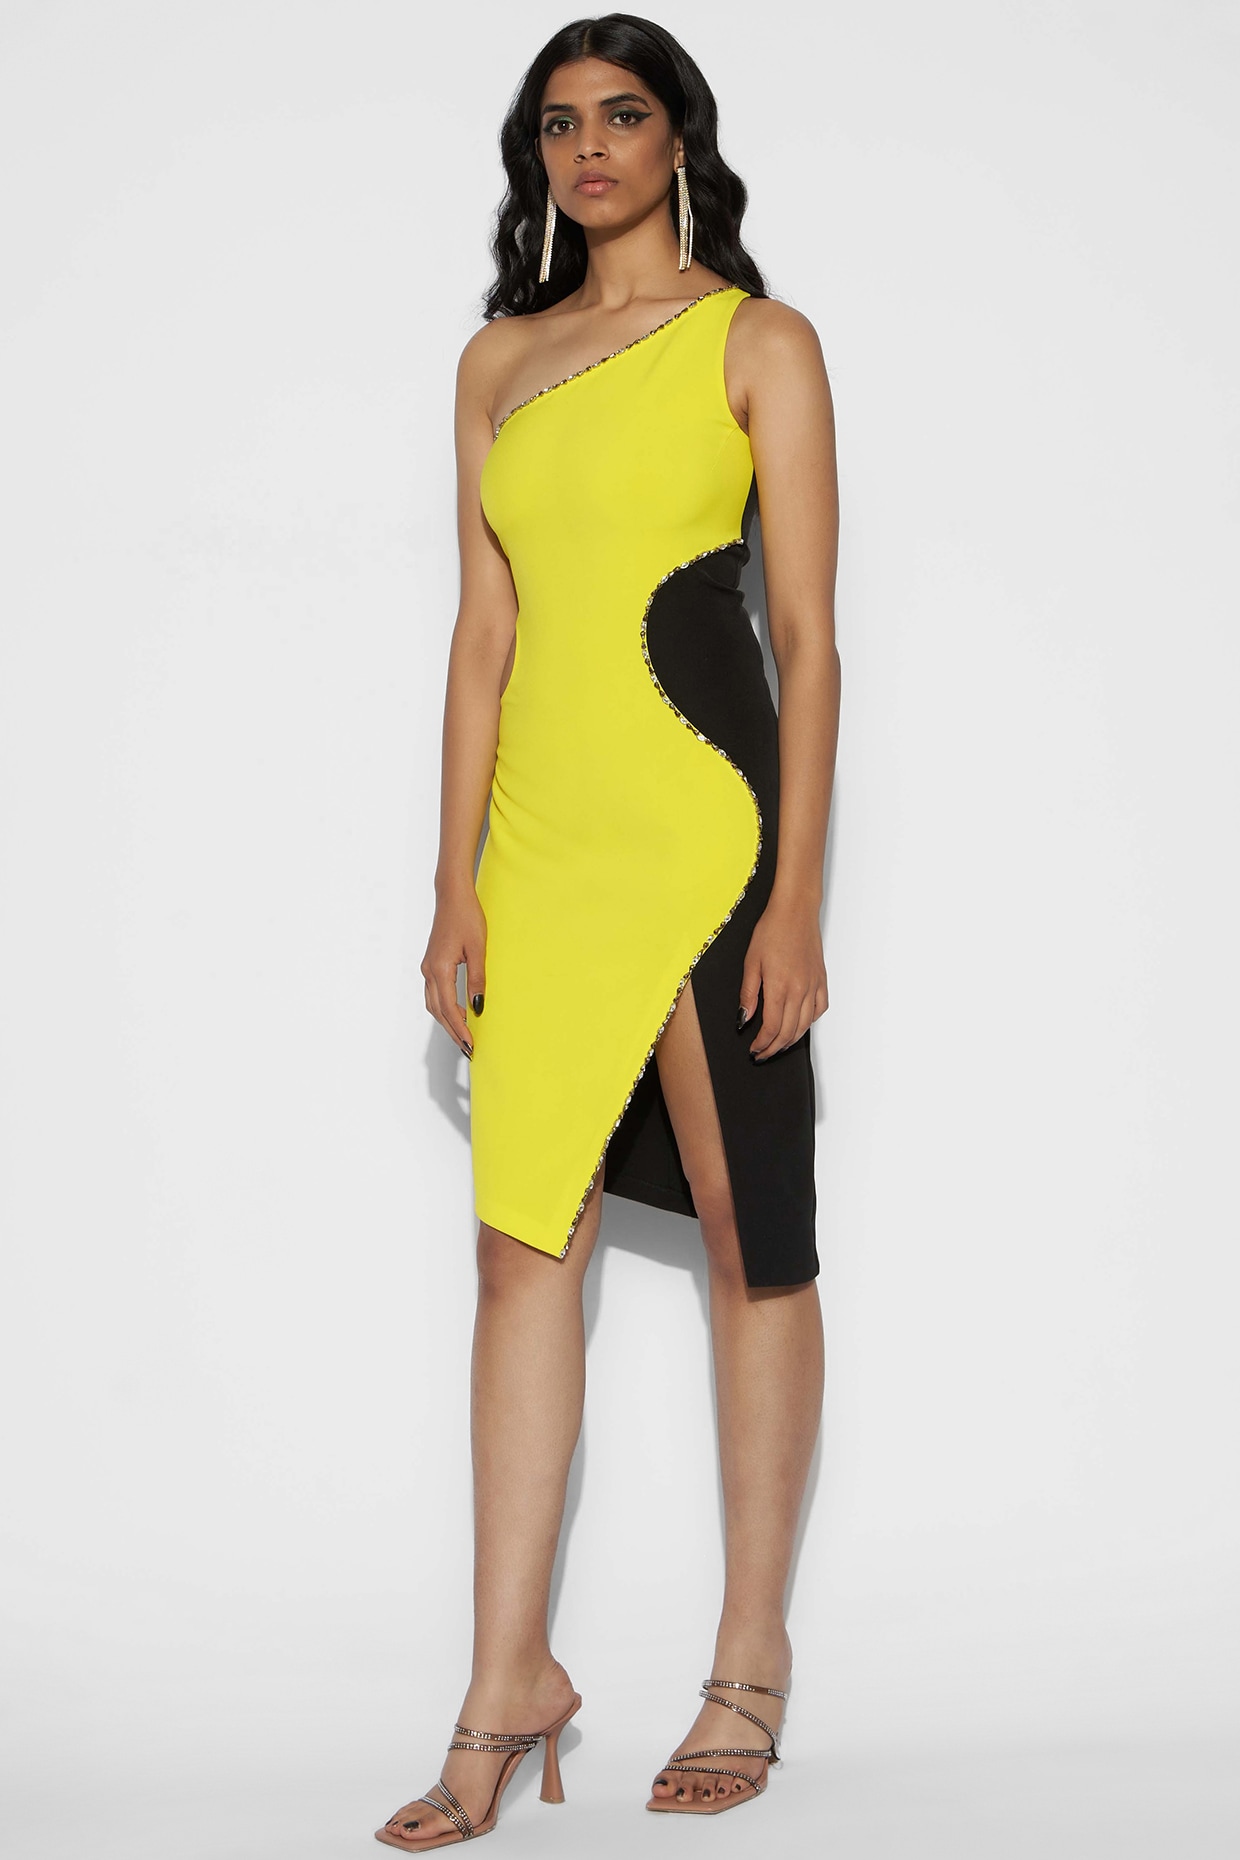 Aje Style Files | How to Nail the Yellow Dress Trend | Dress for a Night